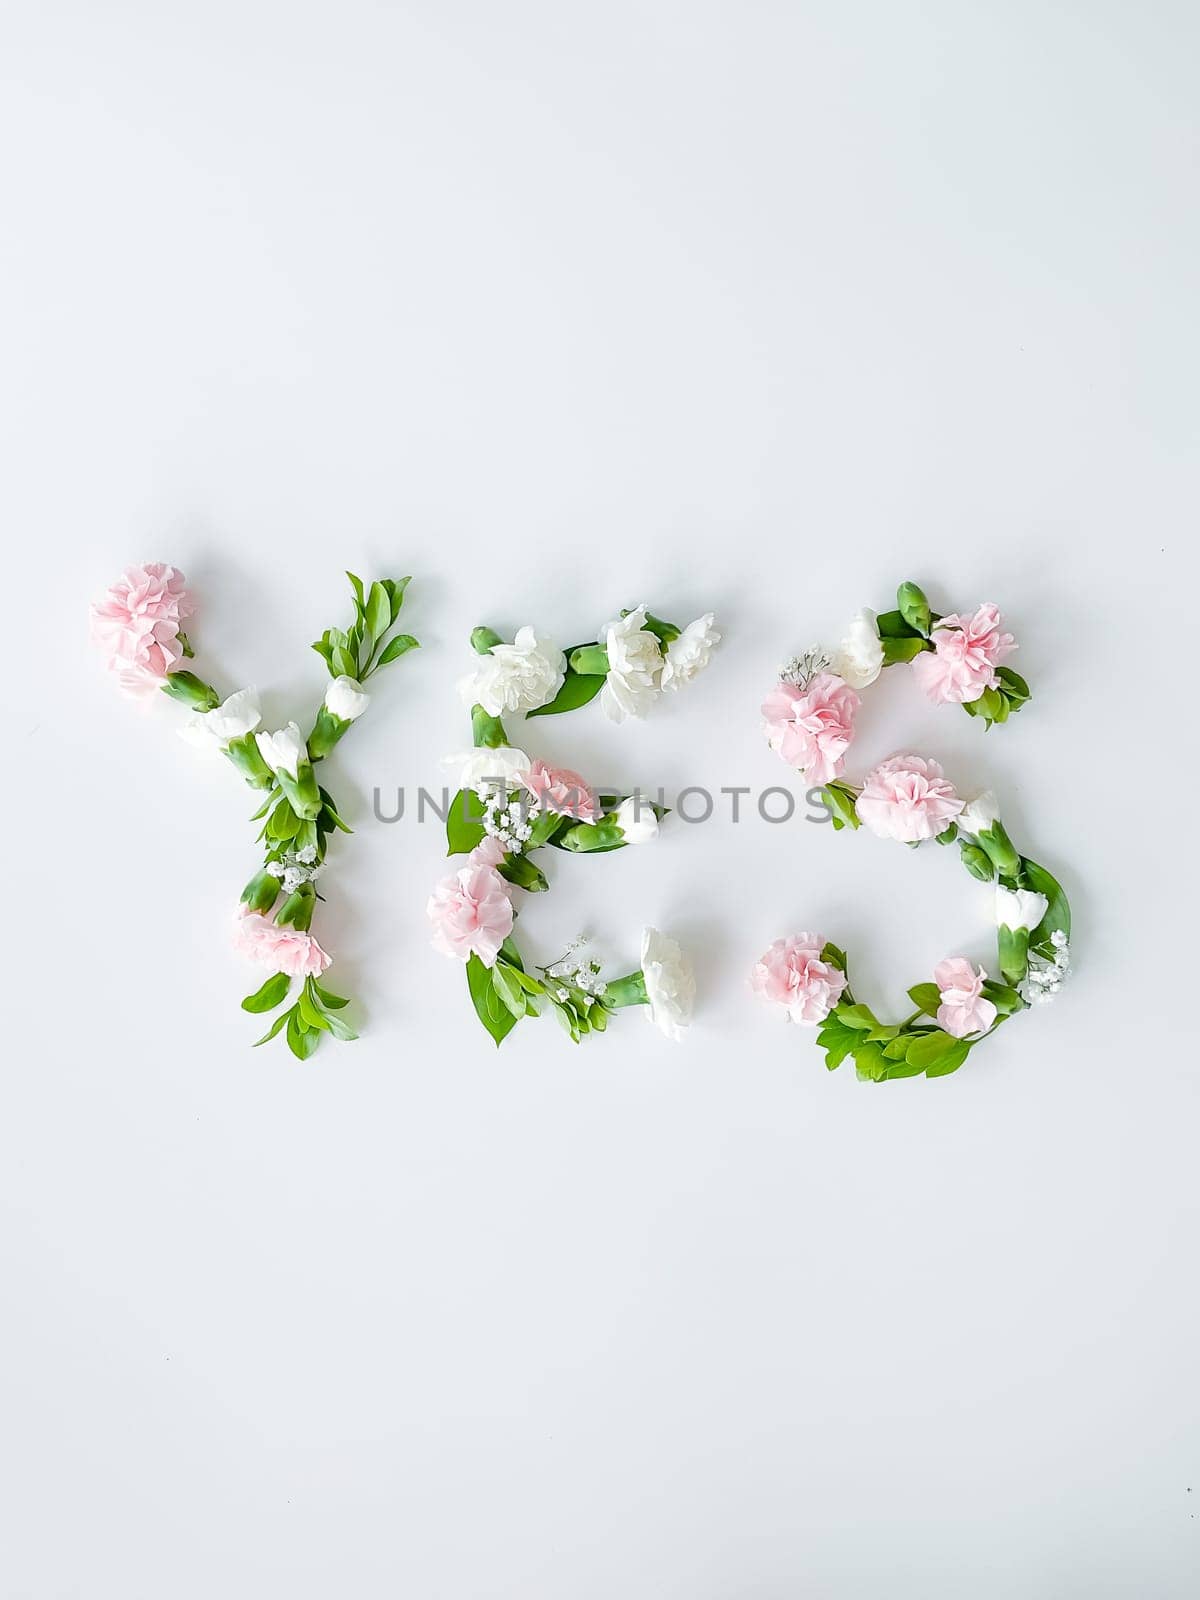 The word "YES" from flowers on a white background. Spring concept. flat lay